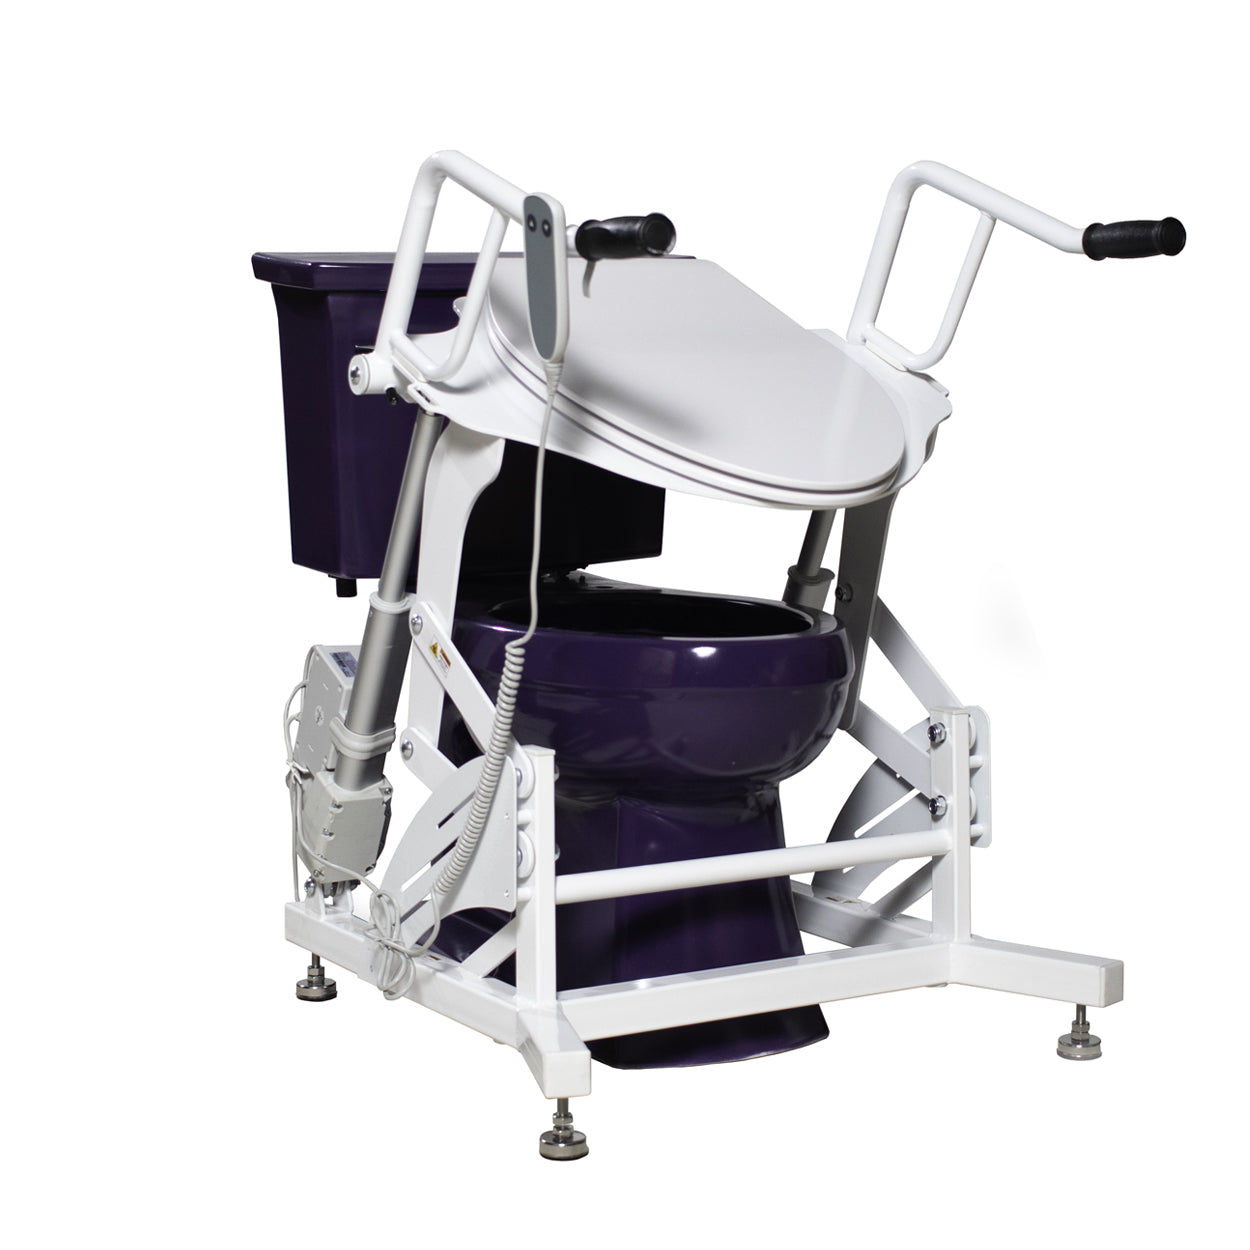 Image of Dignity Lifts - Basic Toilet Lift - BL1 - In Stock